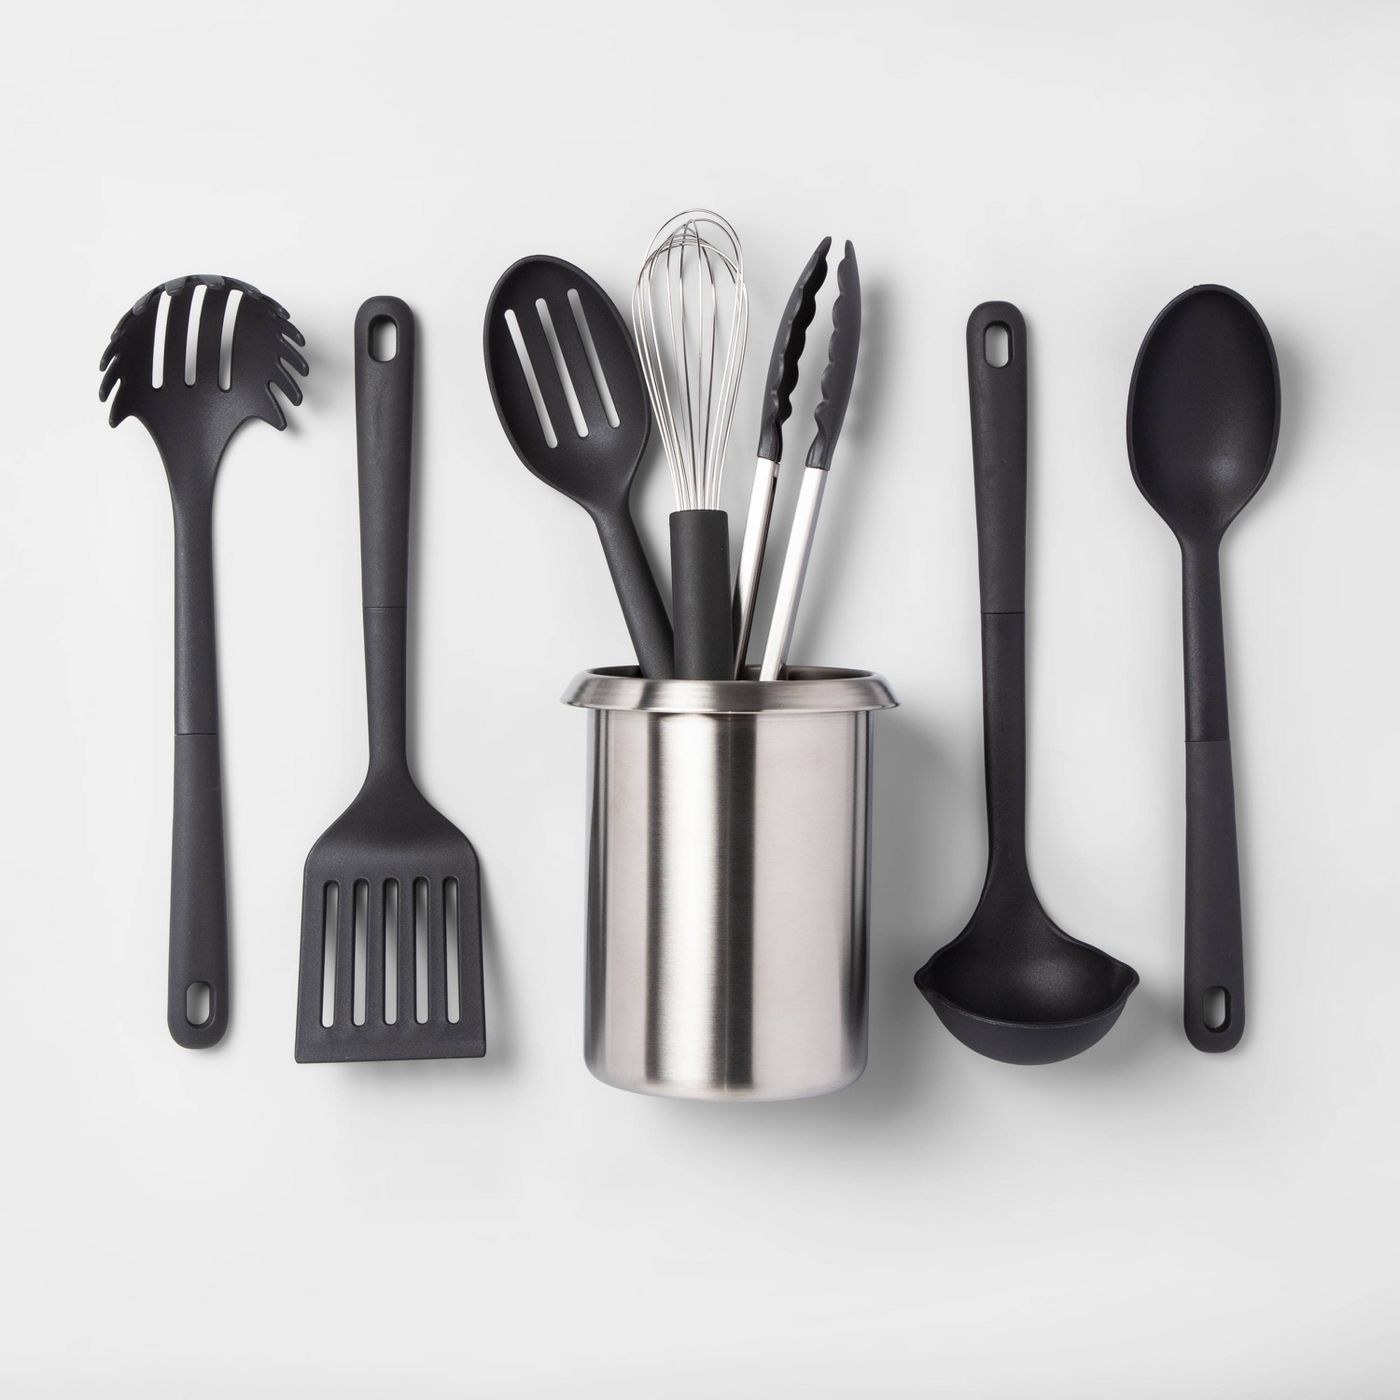 A set of 8 cooking tools